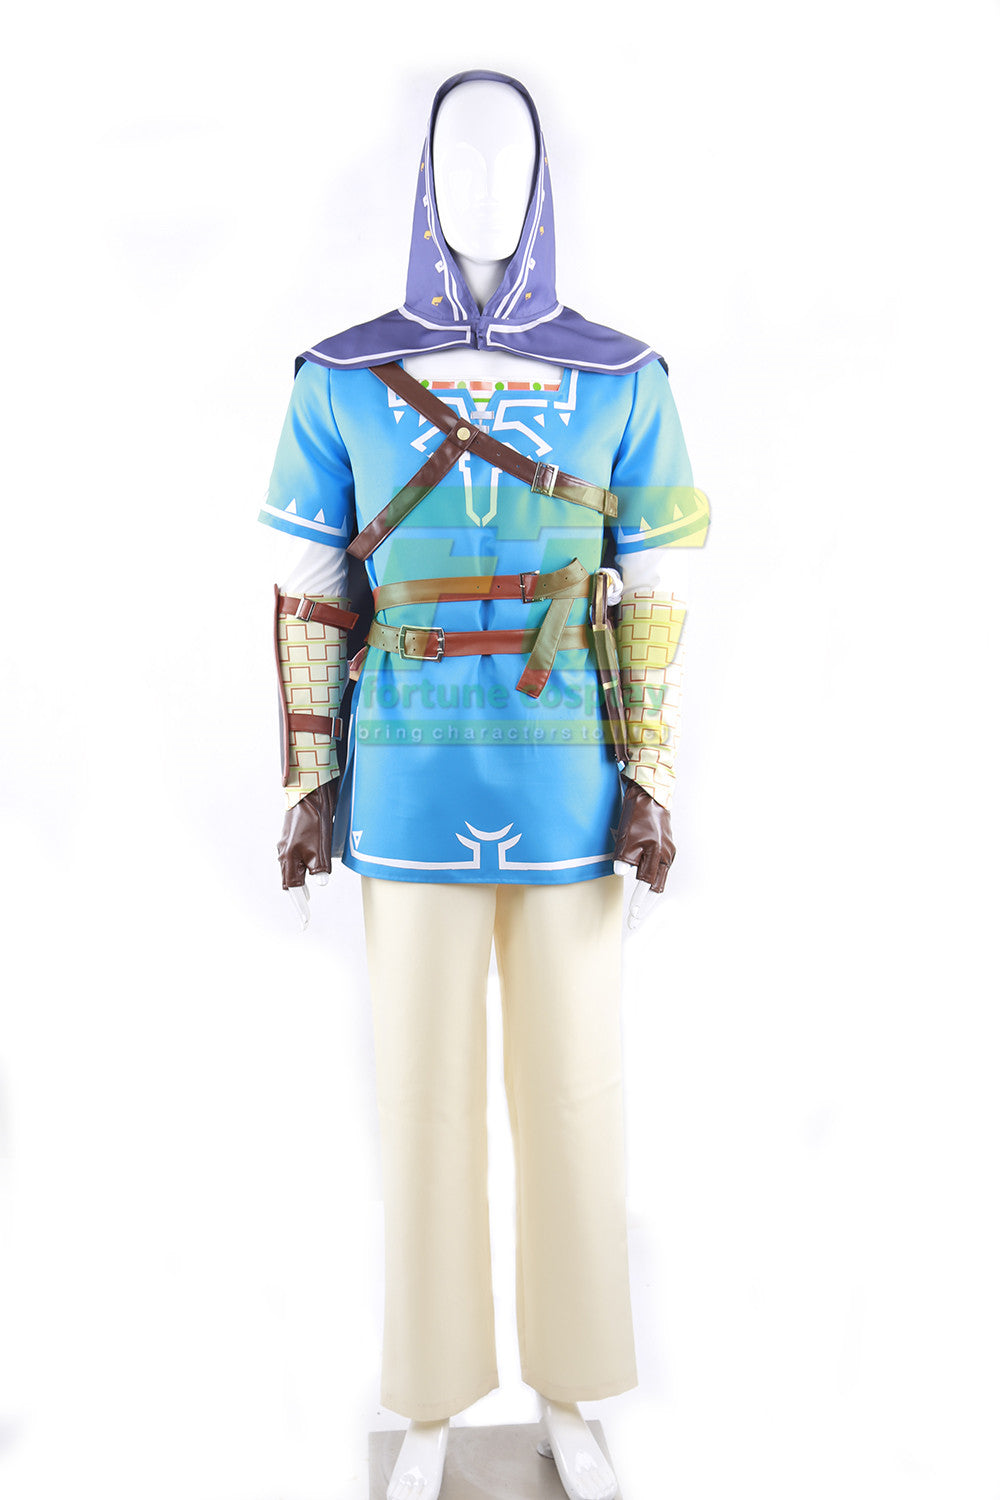 The Legend of Zelda Breath of the Wild Link Sheikah Slate Quiver Cosplay Costume - fortunecosplay